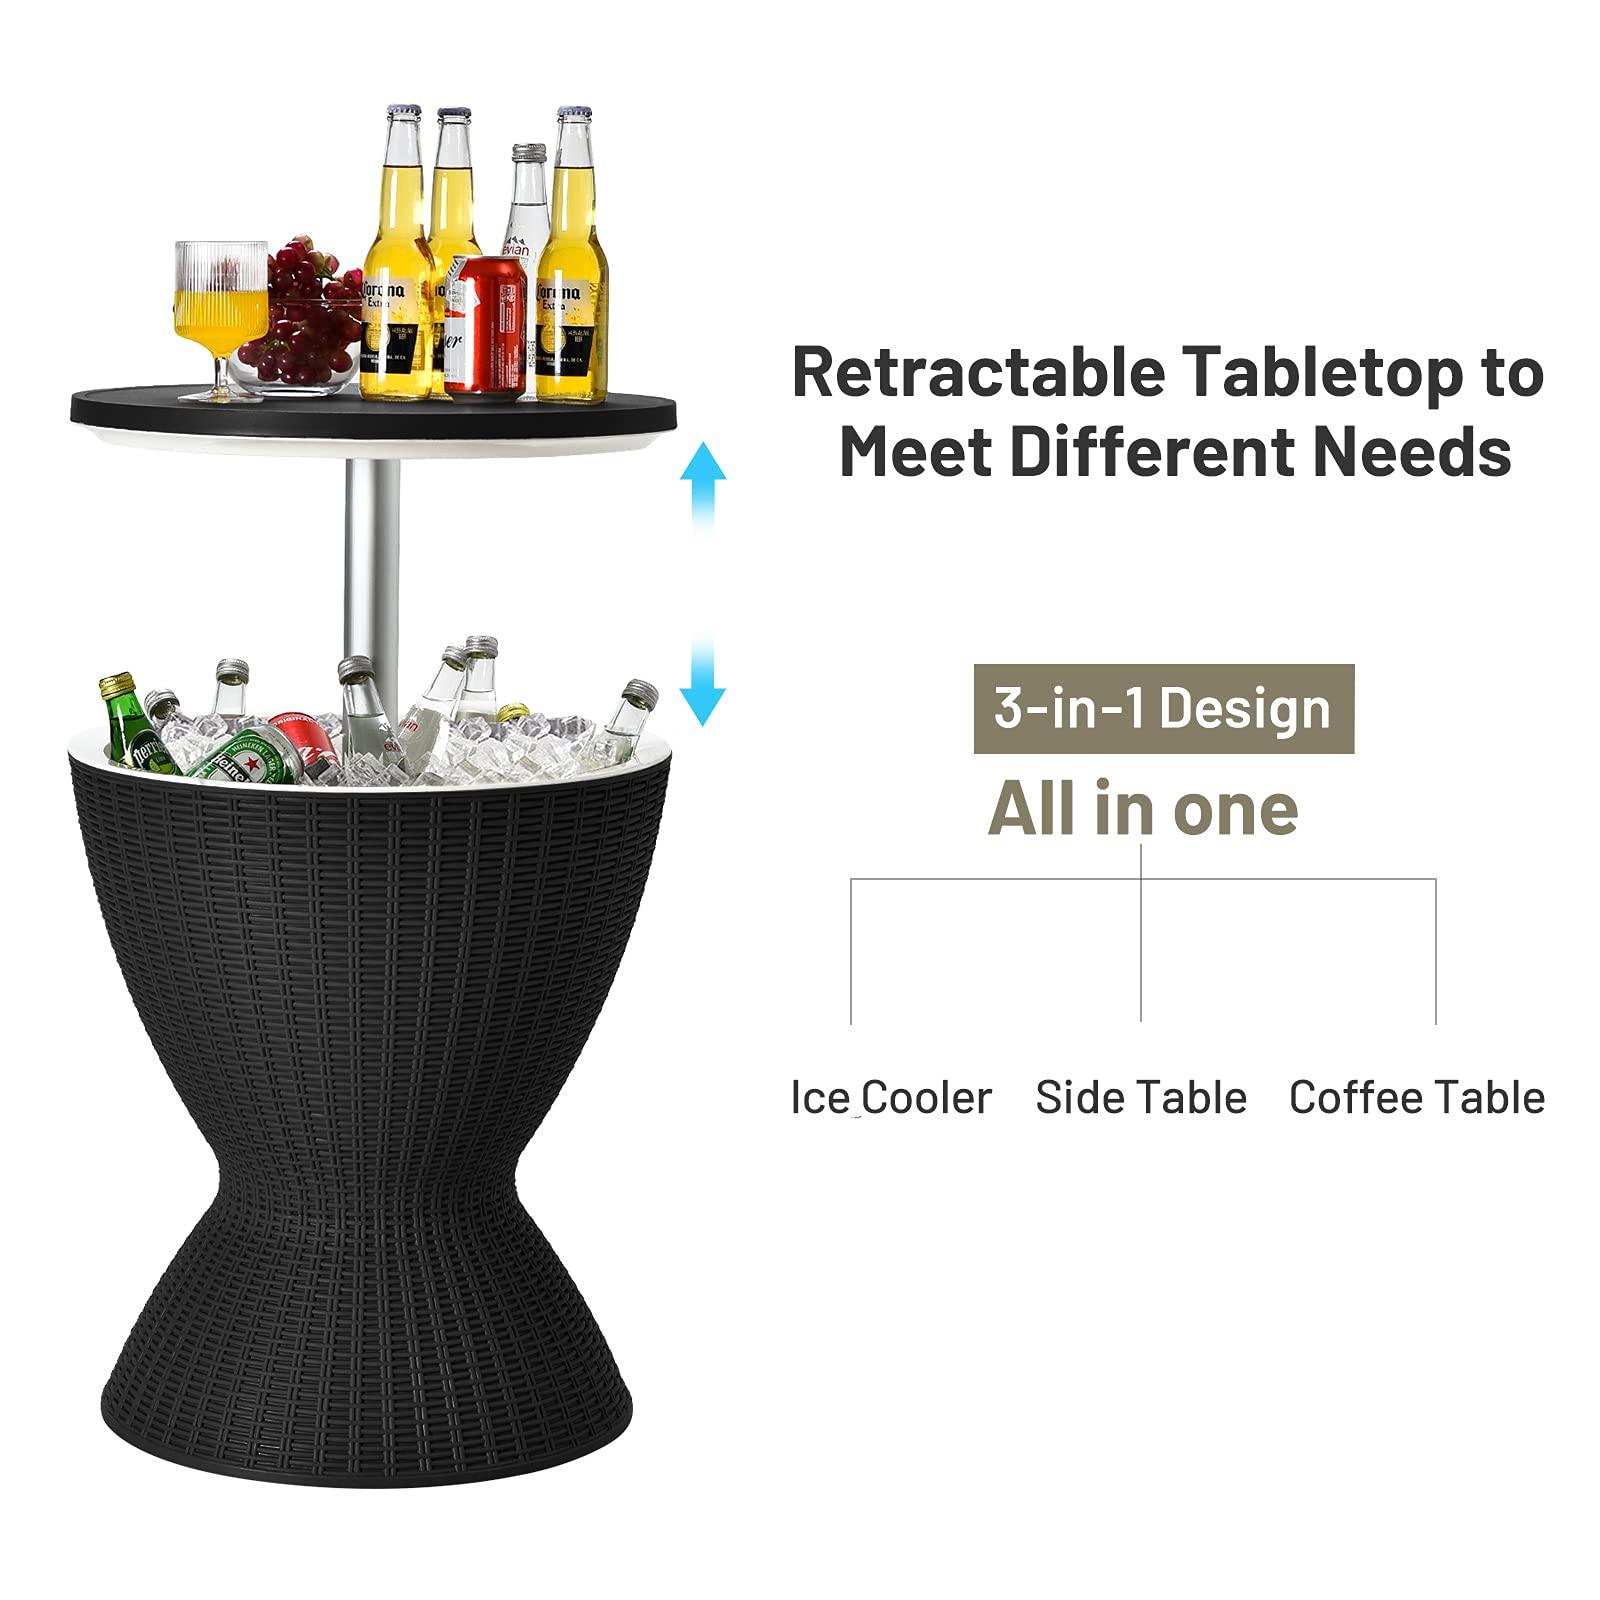 Tangkula Outdoor Cool Bar Table, Rattan Patio 8 Gallon Beer and Wine Cooler, All-Weather Ice Bucket w/Height Adjustable Top, Drainage Plug, 3-in-1 Cocktail Coffee Table for Party, Picnic (Black) - CookCave